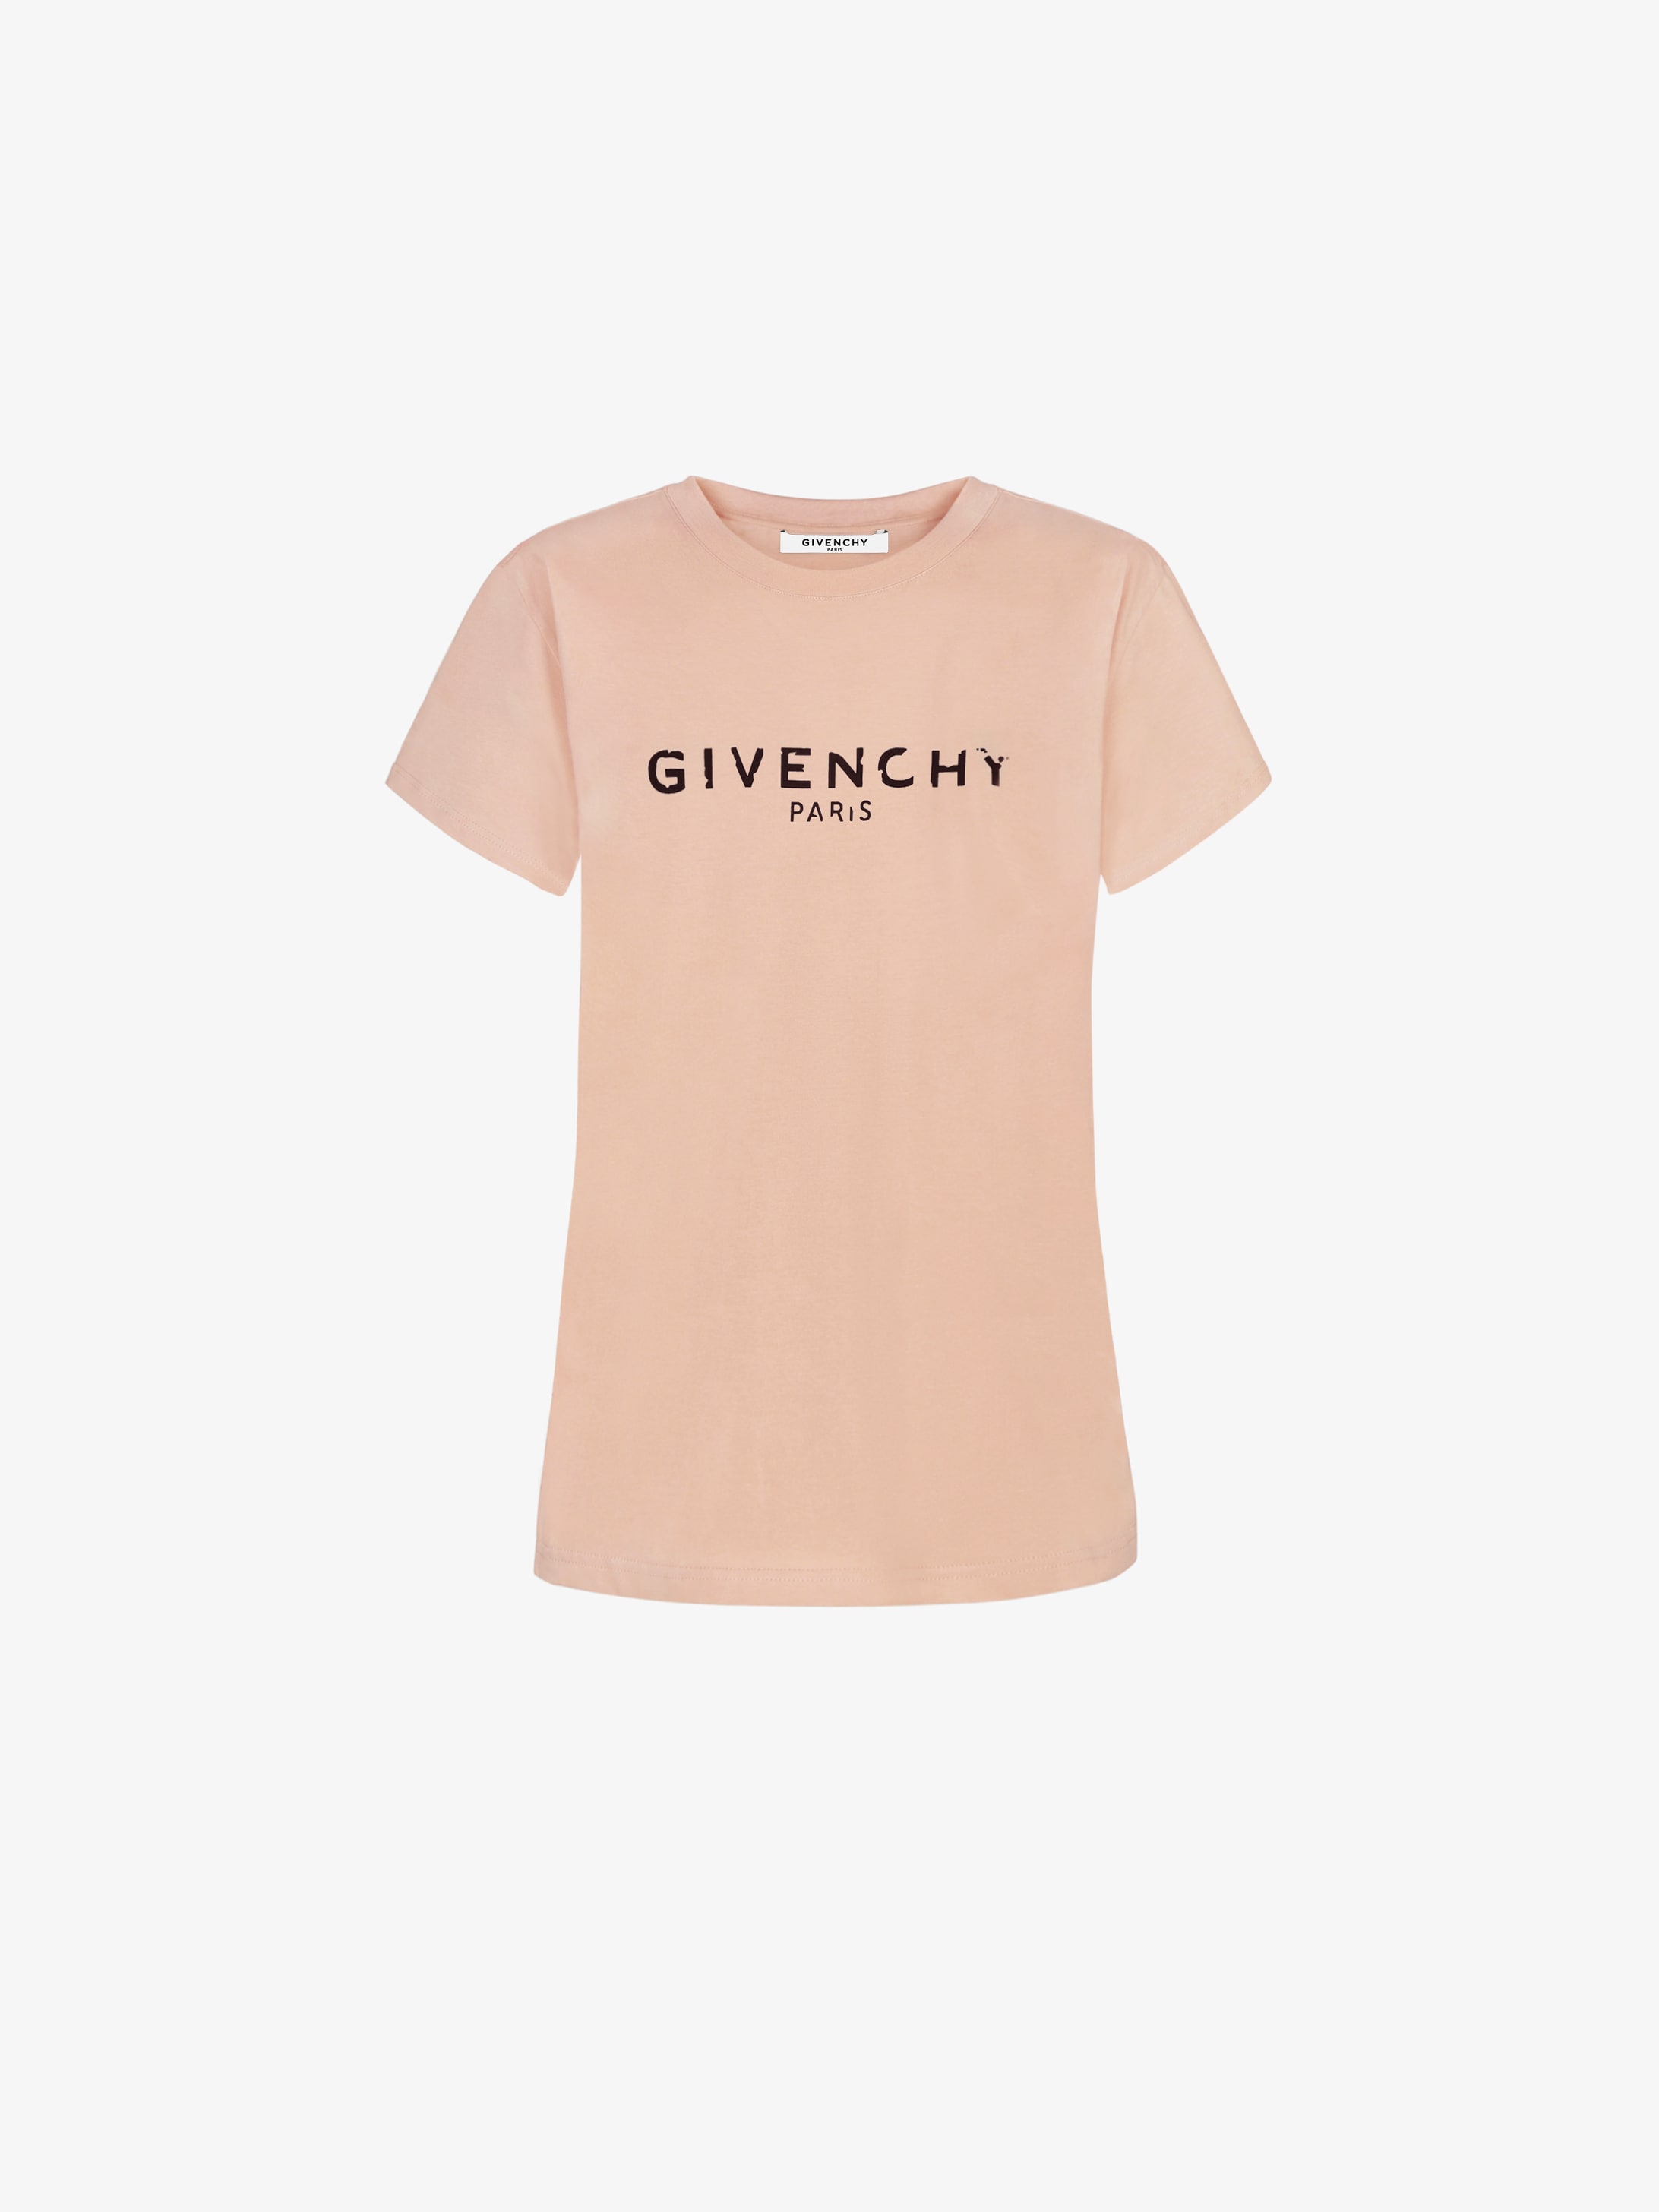 givenchy paris t shirt with holes